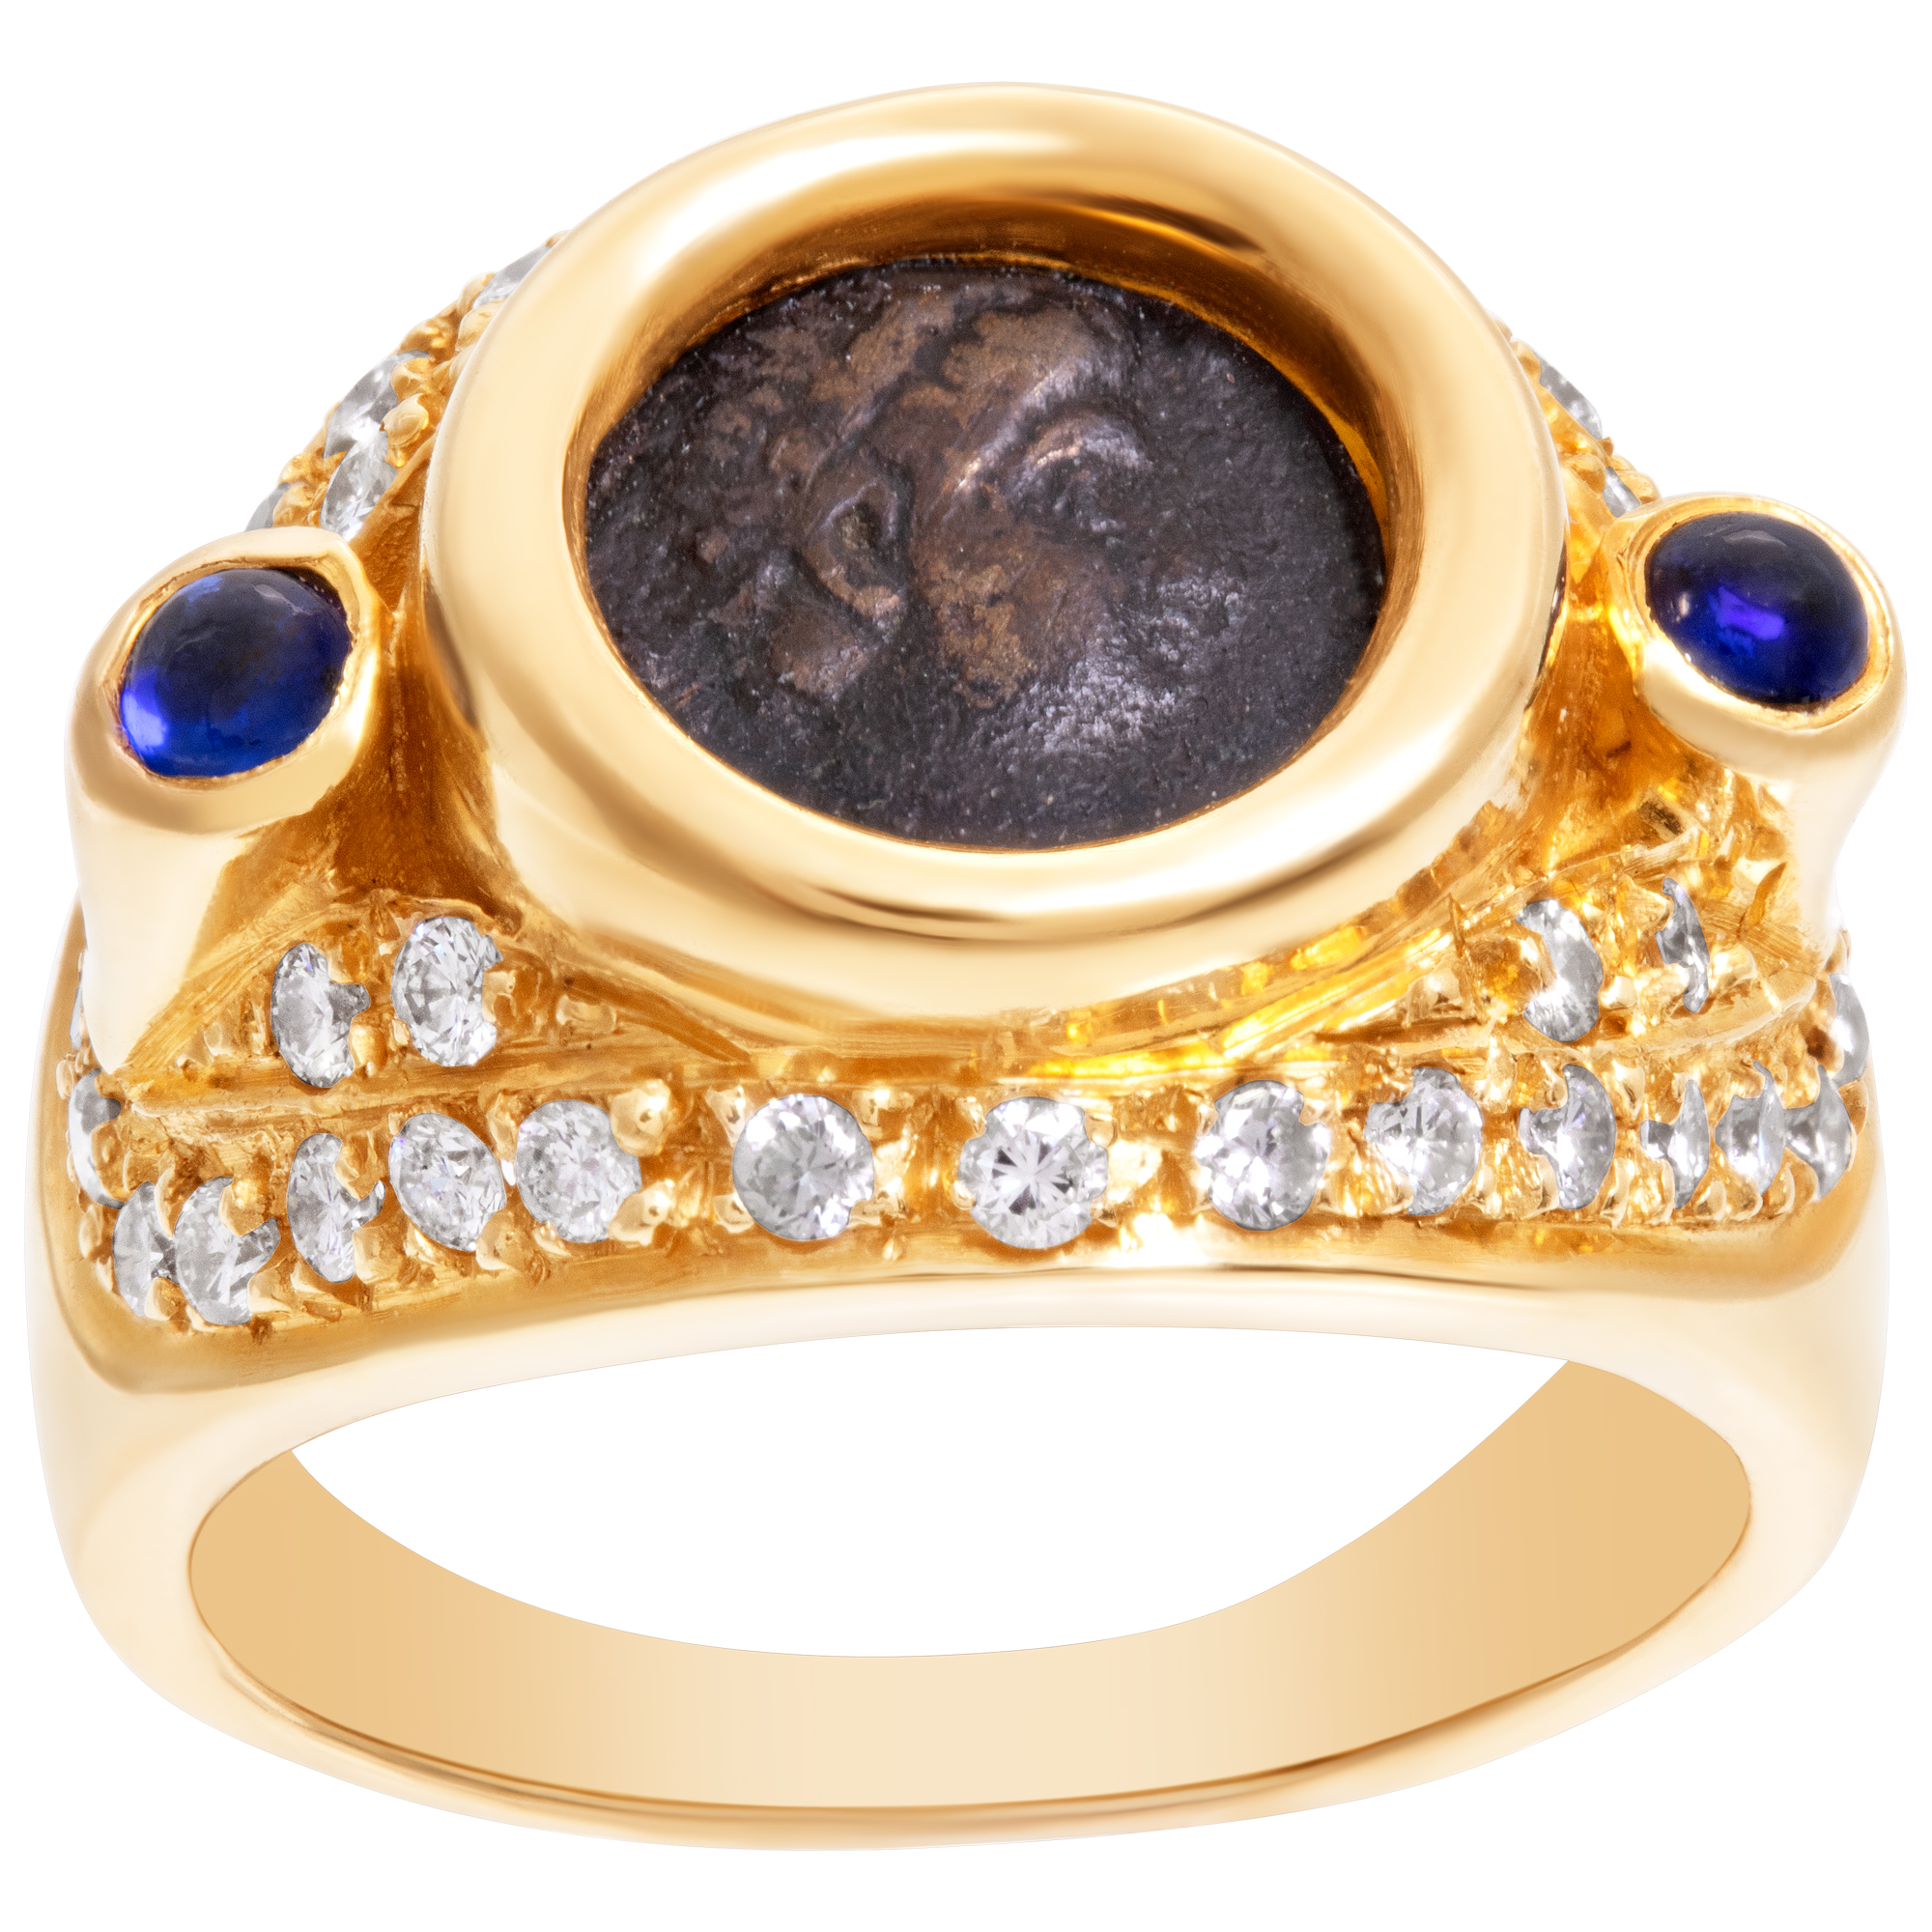 Coin ring set in 18k with diamond and cabobhon sapphire accents image 1